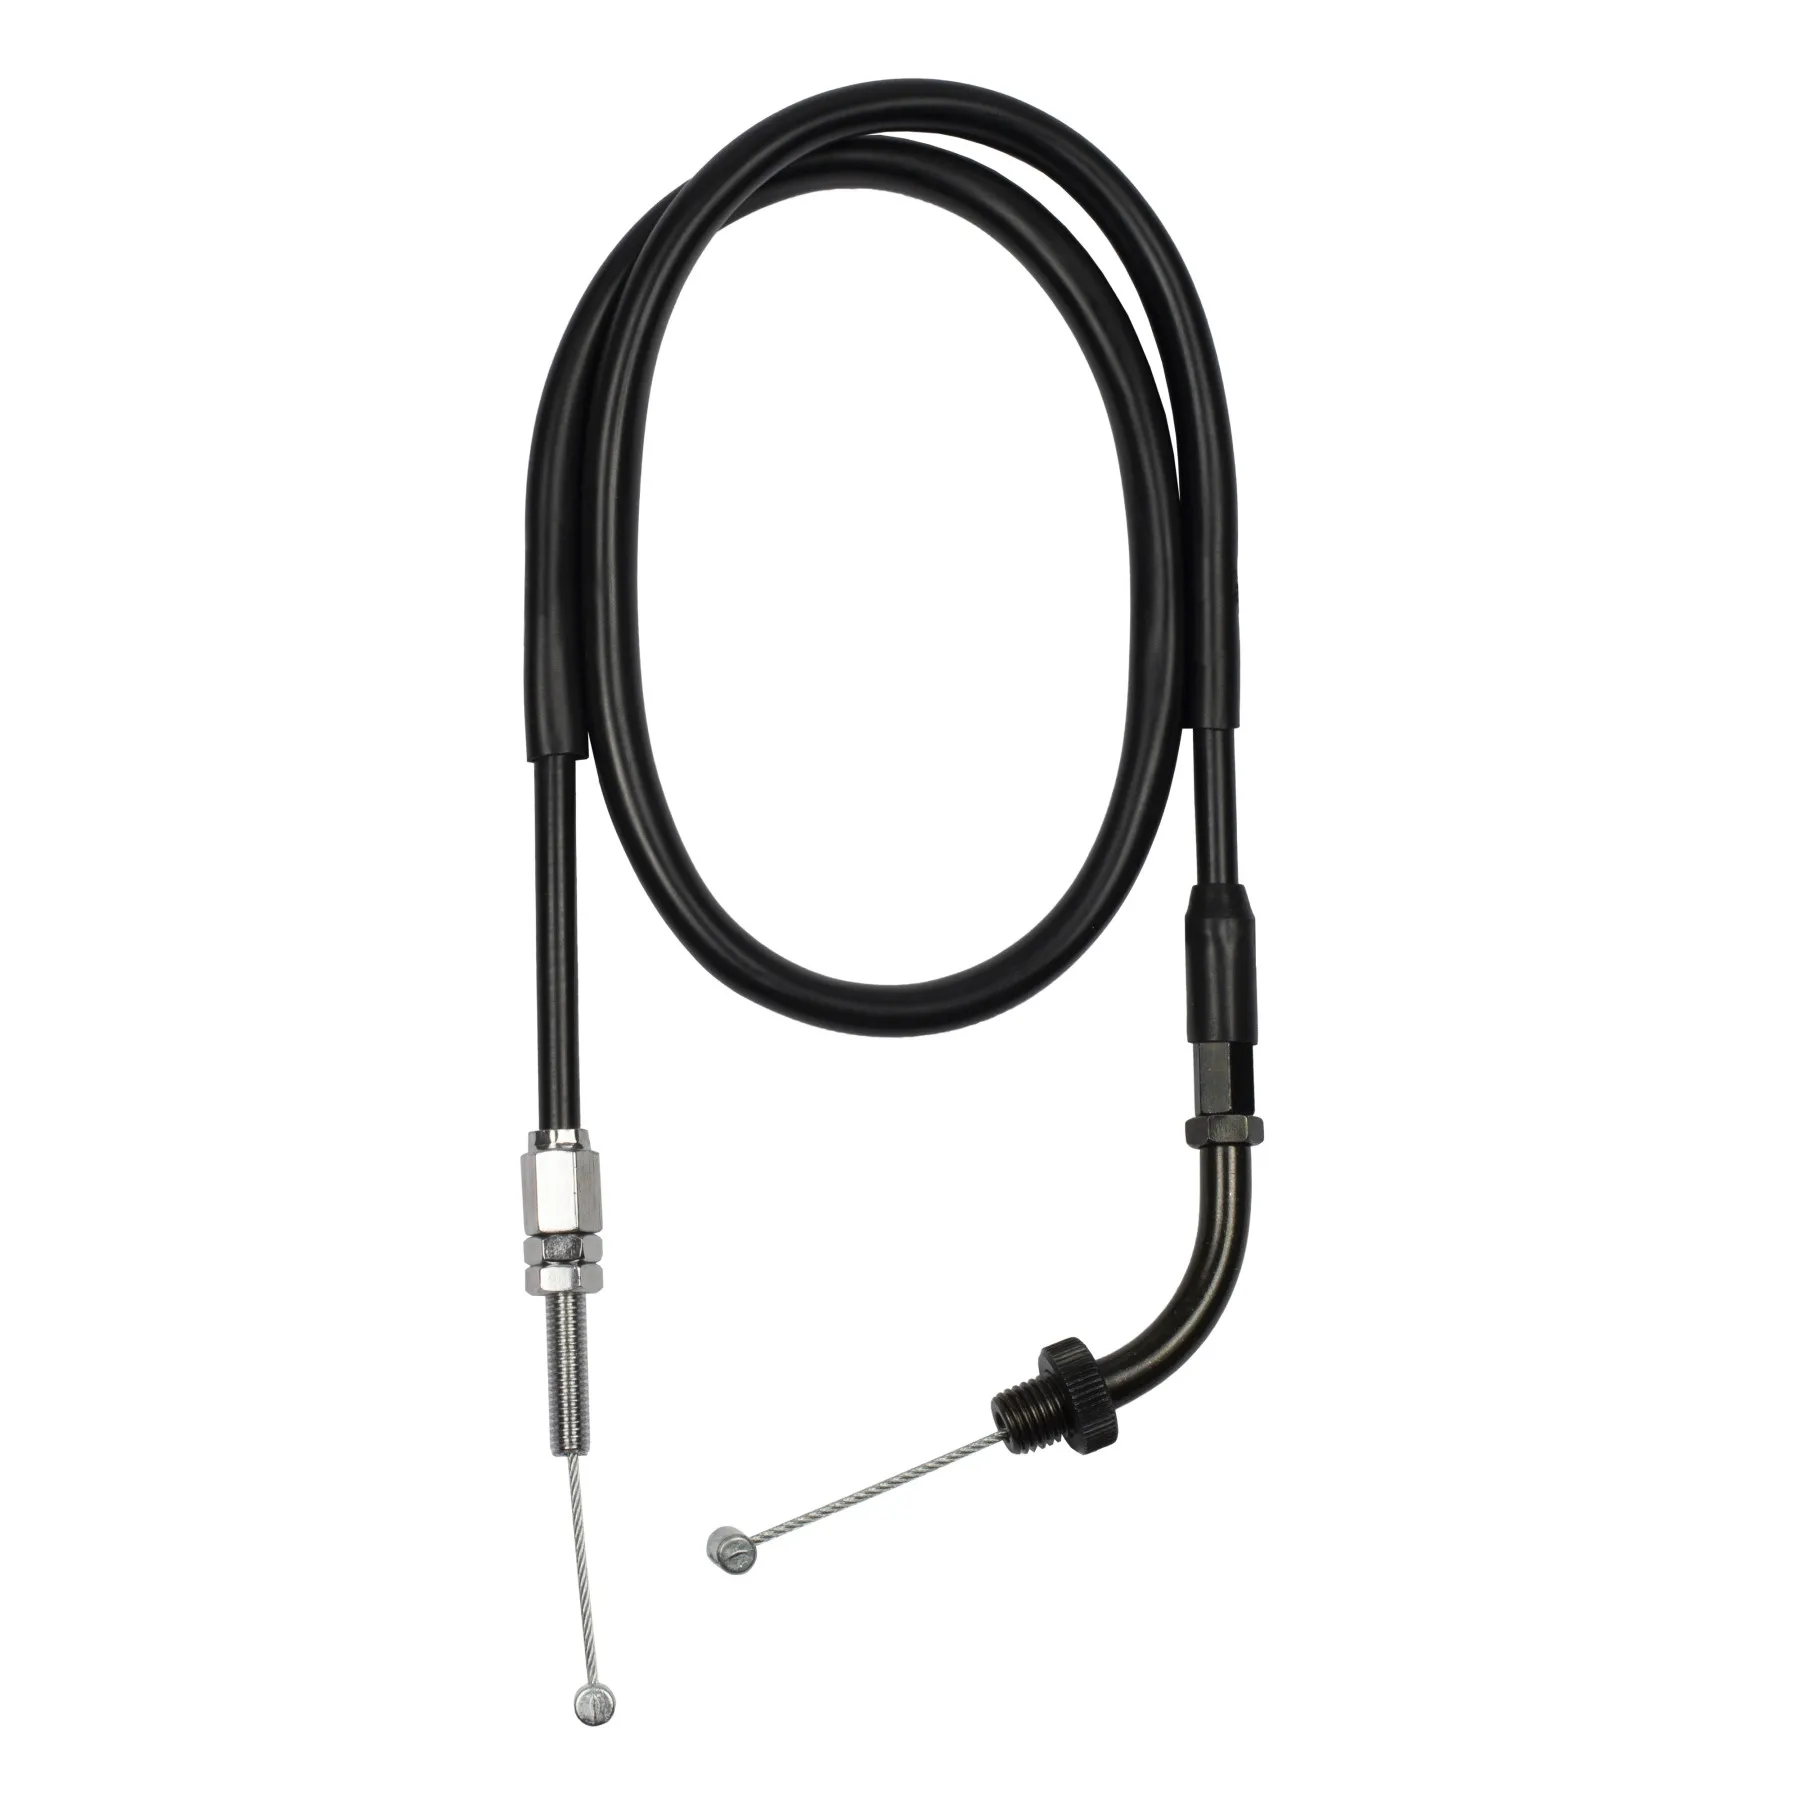 

MotoMaster 17910-ML7-000 Throttle Cable A (OPEN) for Honda VFR 750 F (1986-1989)